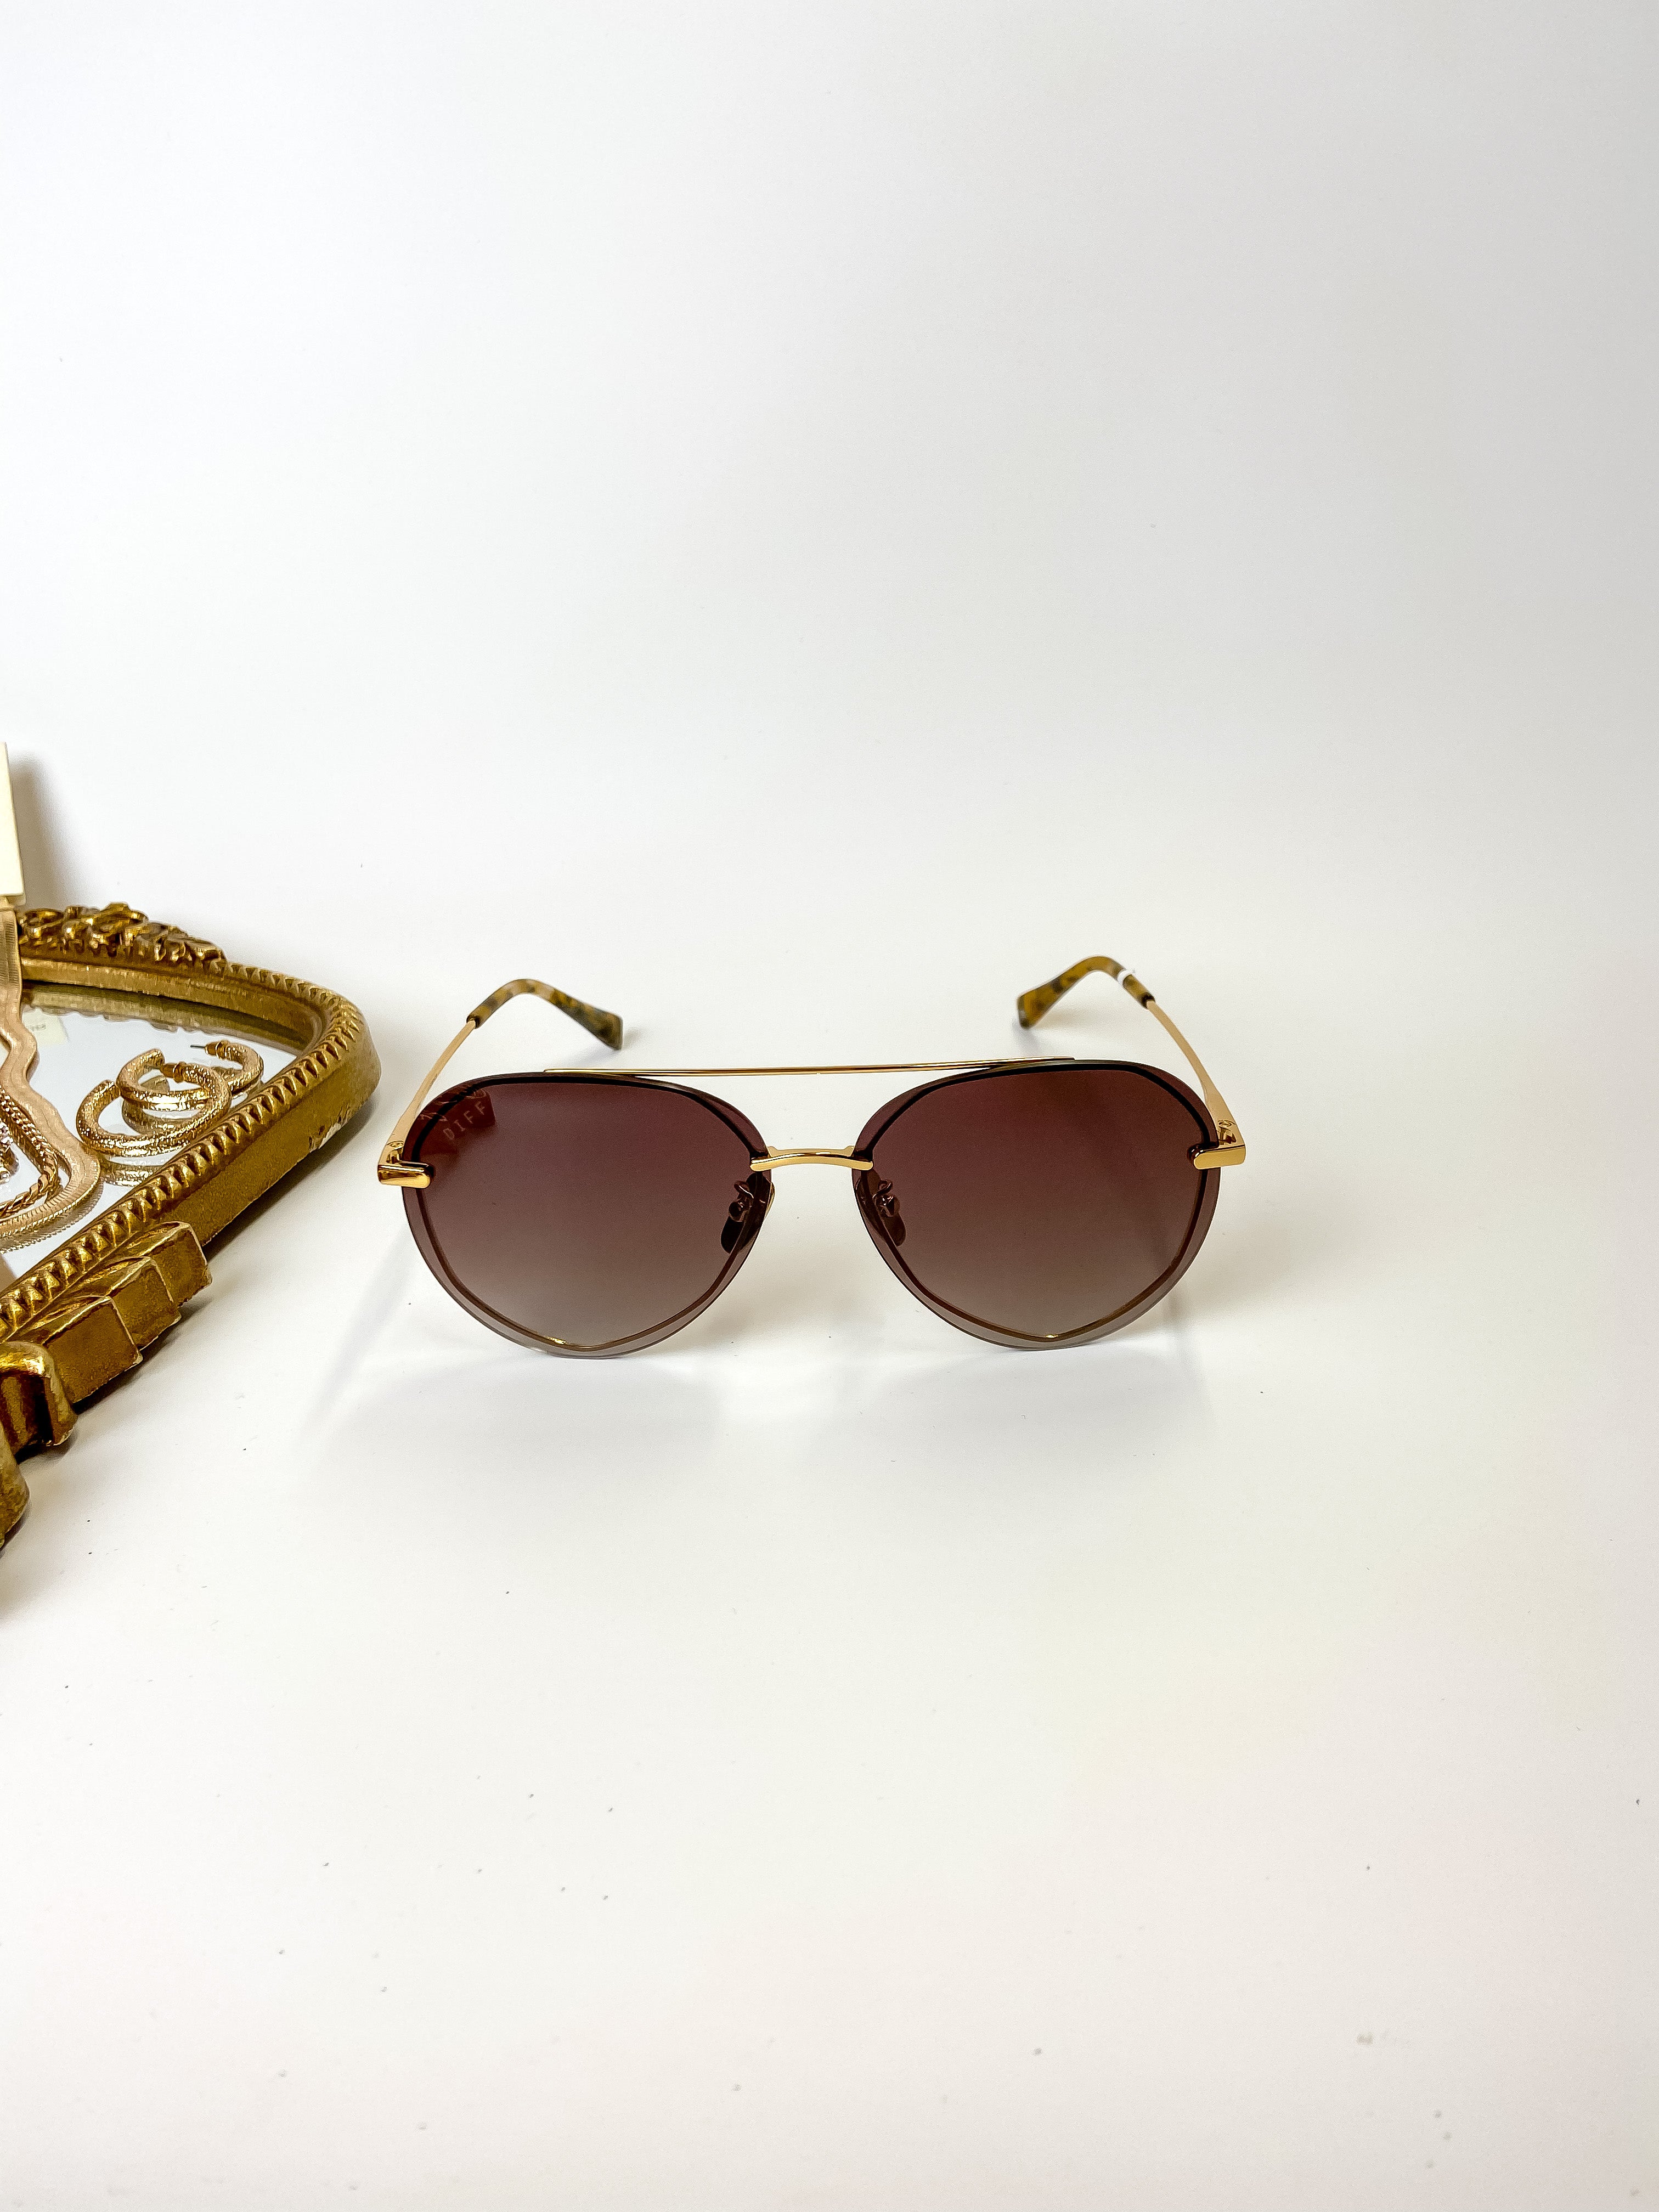 DIFF | Lenox Brown Gradient Lens Sunglasses in Gold Tone - Giddy Up Glamour Boutique